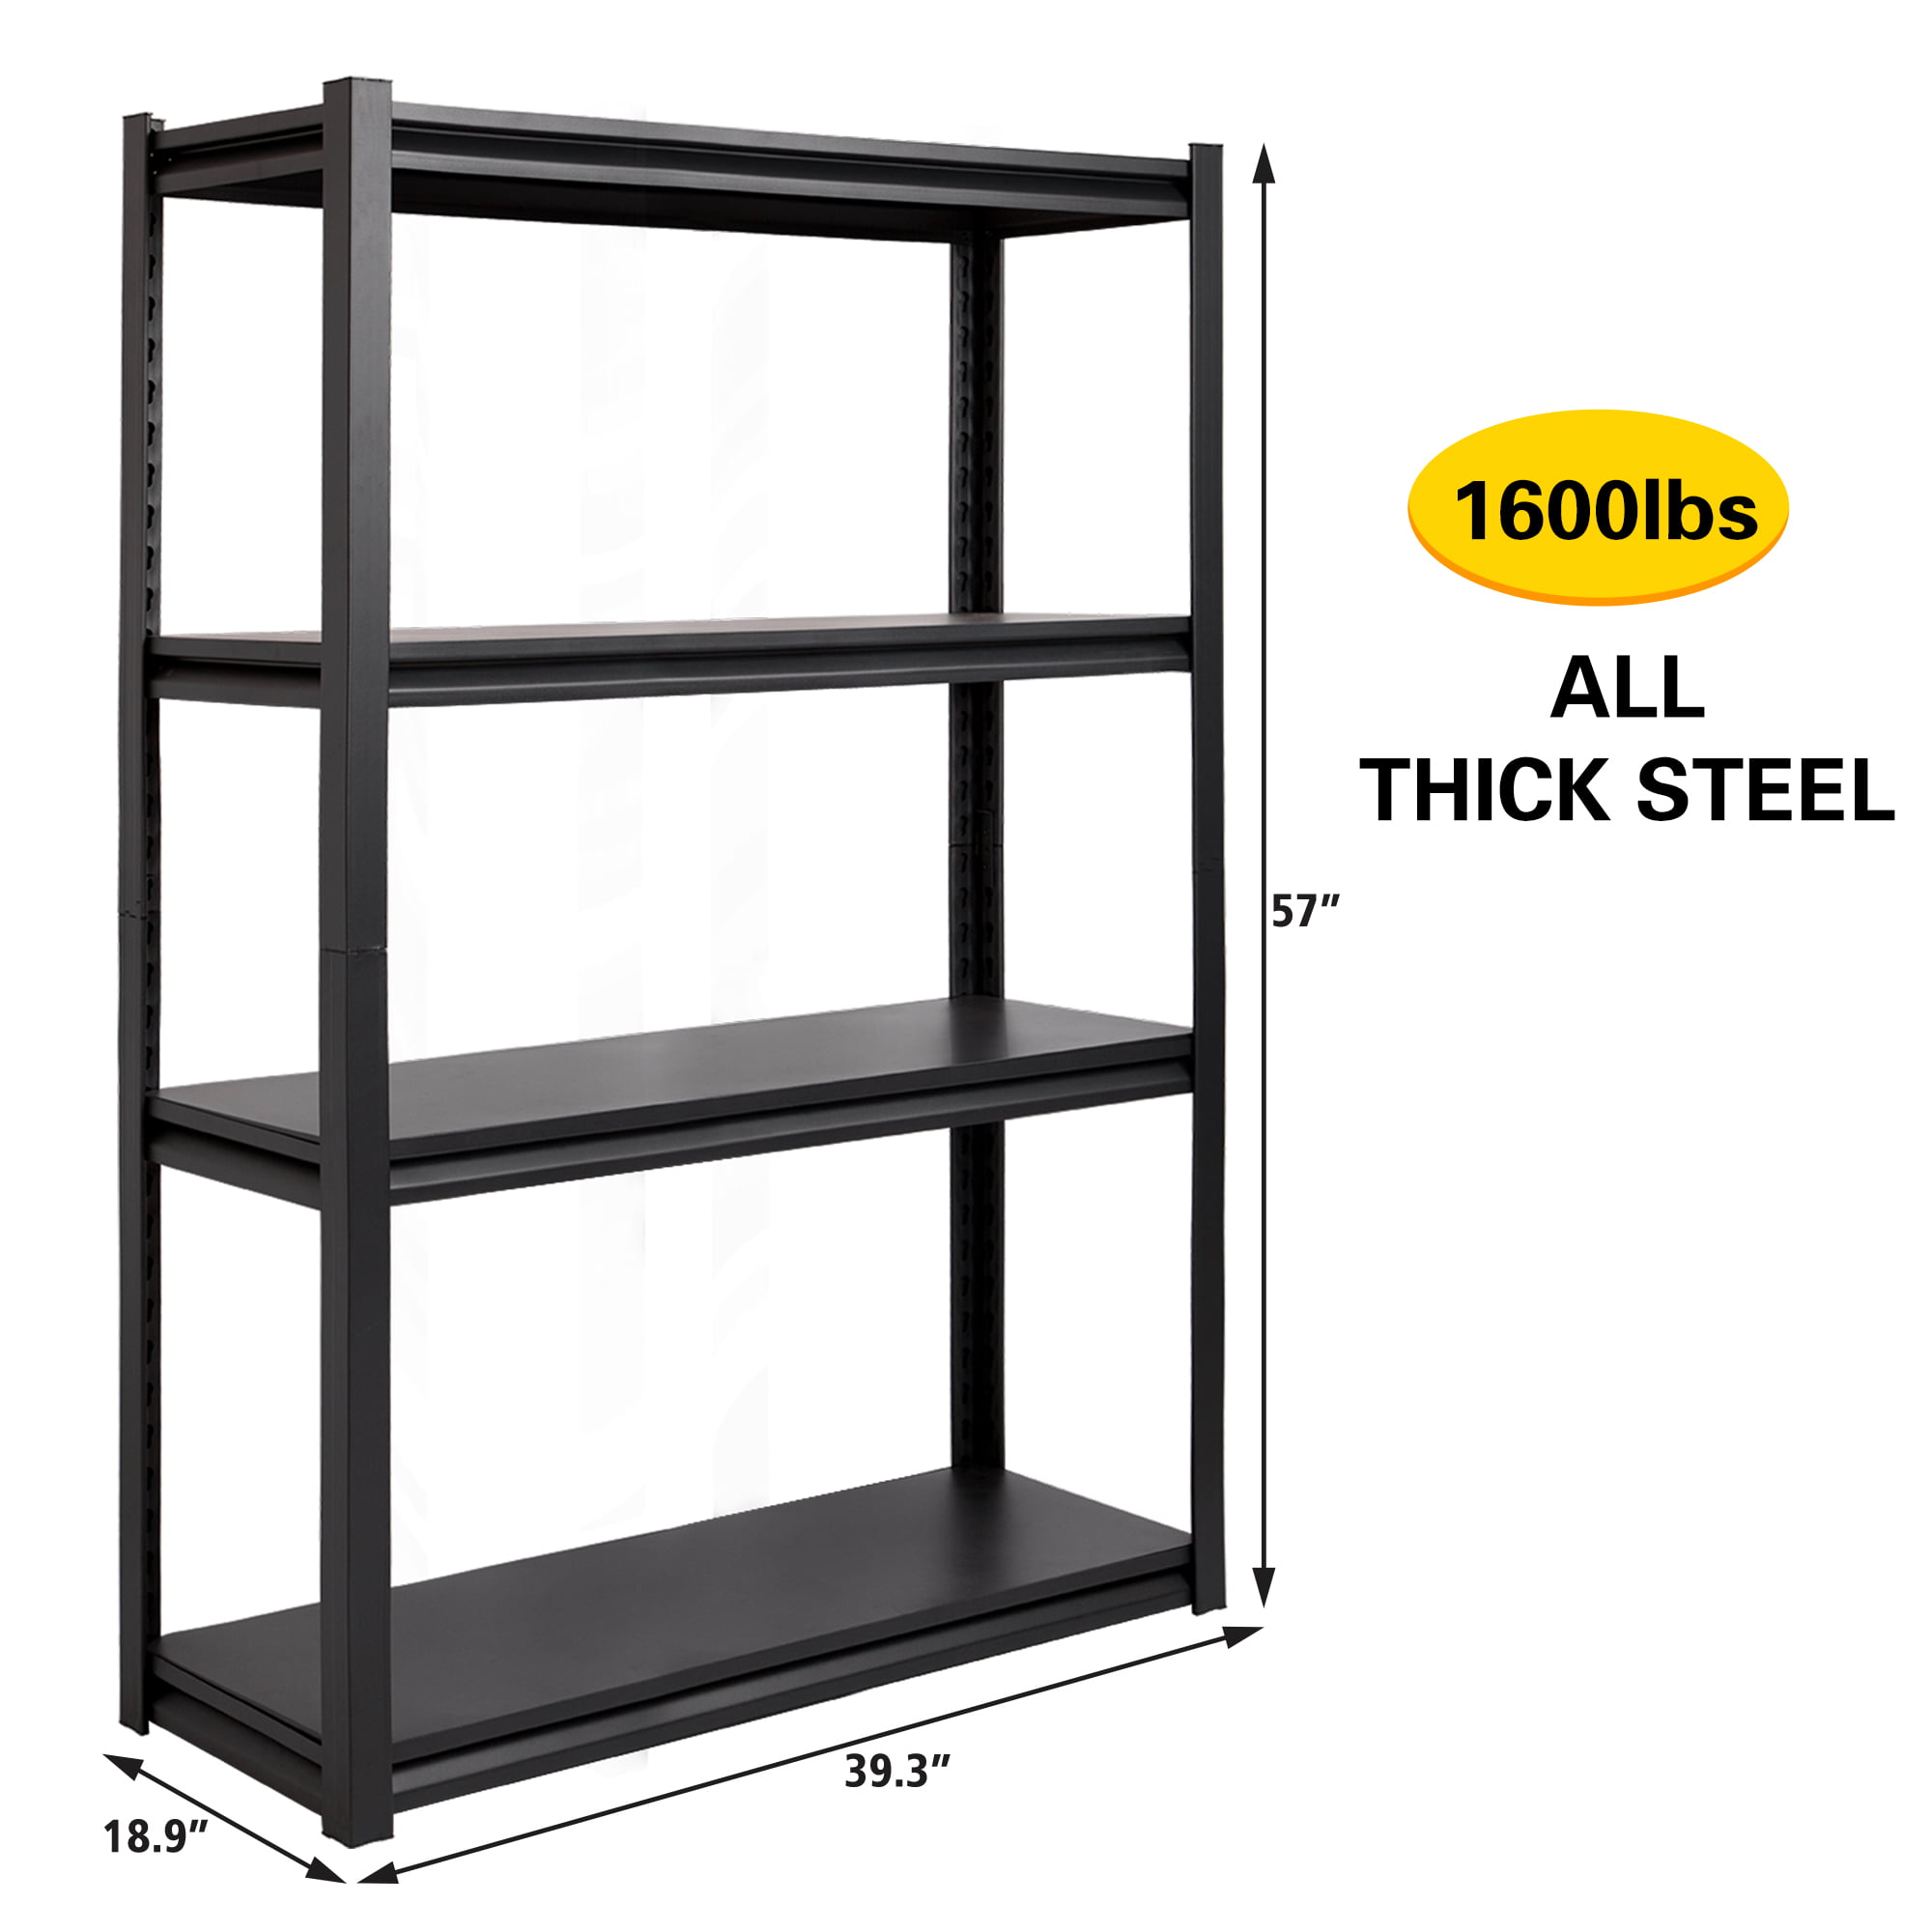 ADDITIONAL BAY CONTAINER RACKING STORAGE SHELVING WAREHOUSE SHELVE GARAGE 2 LEV 